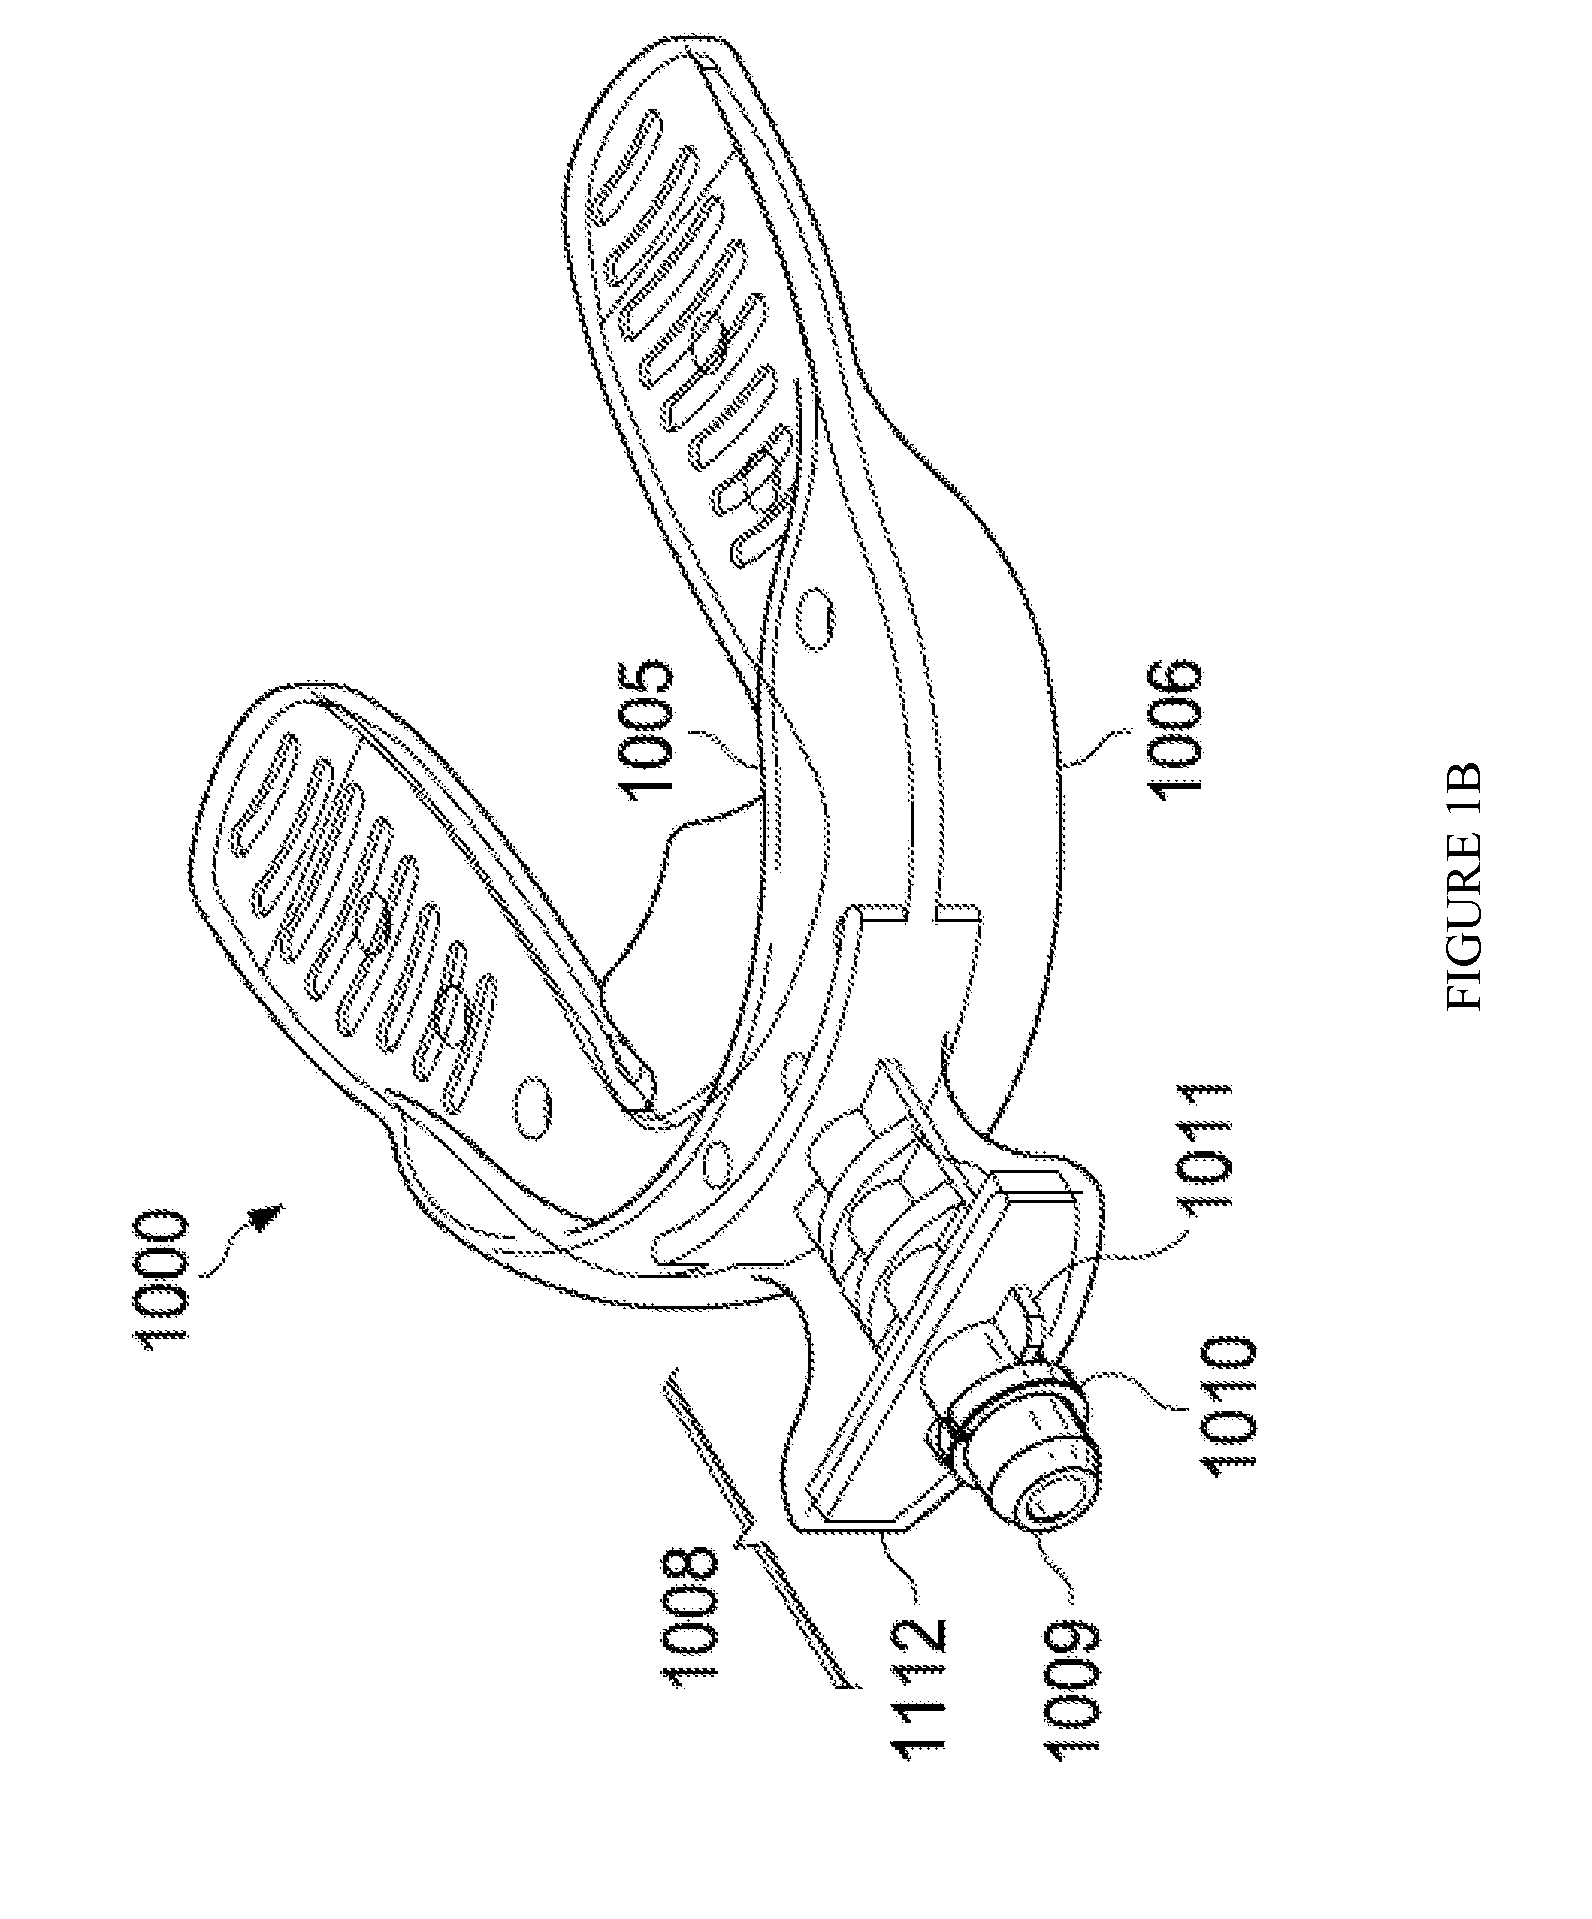 Light cure bite plate for orthodontic remodeling devices